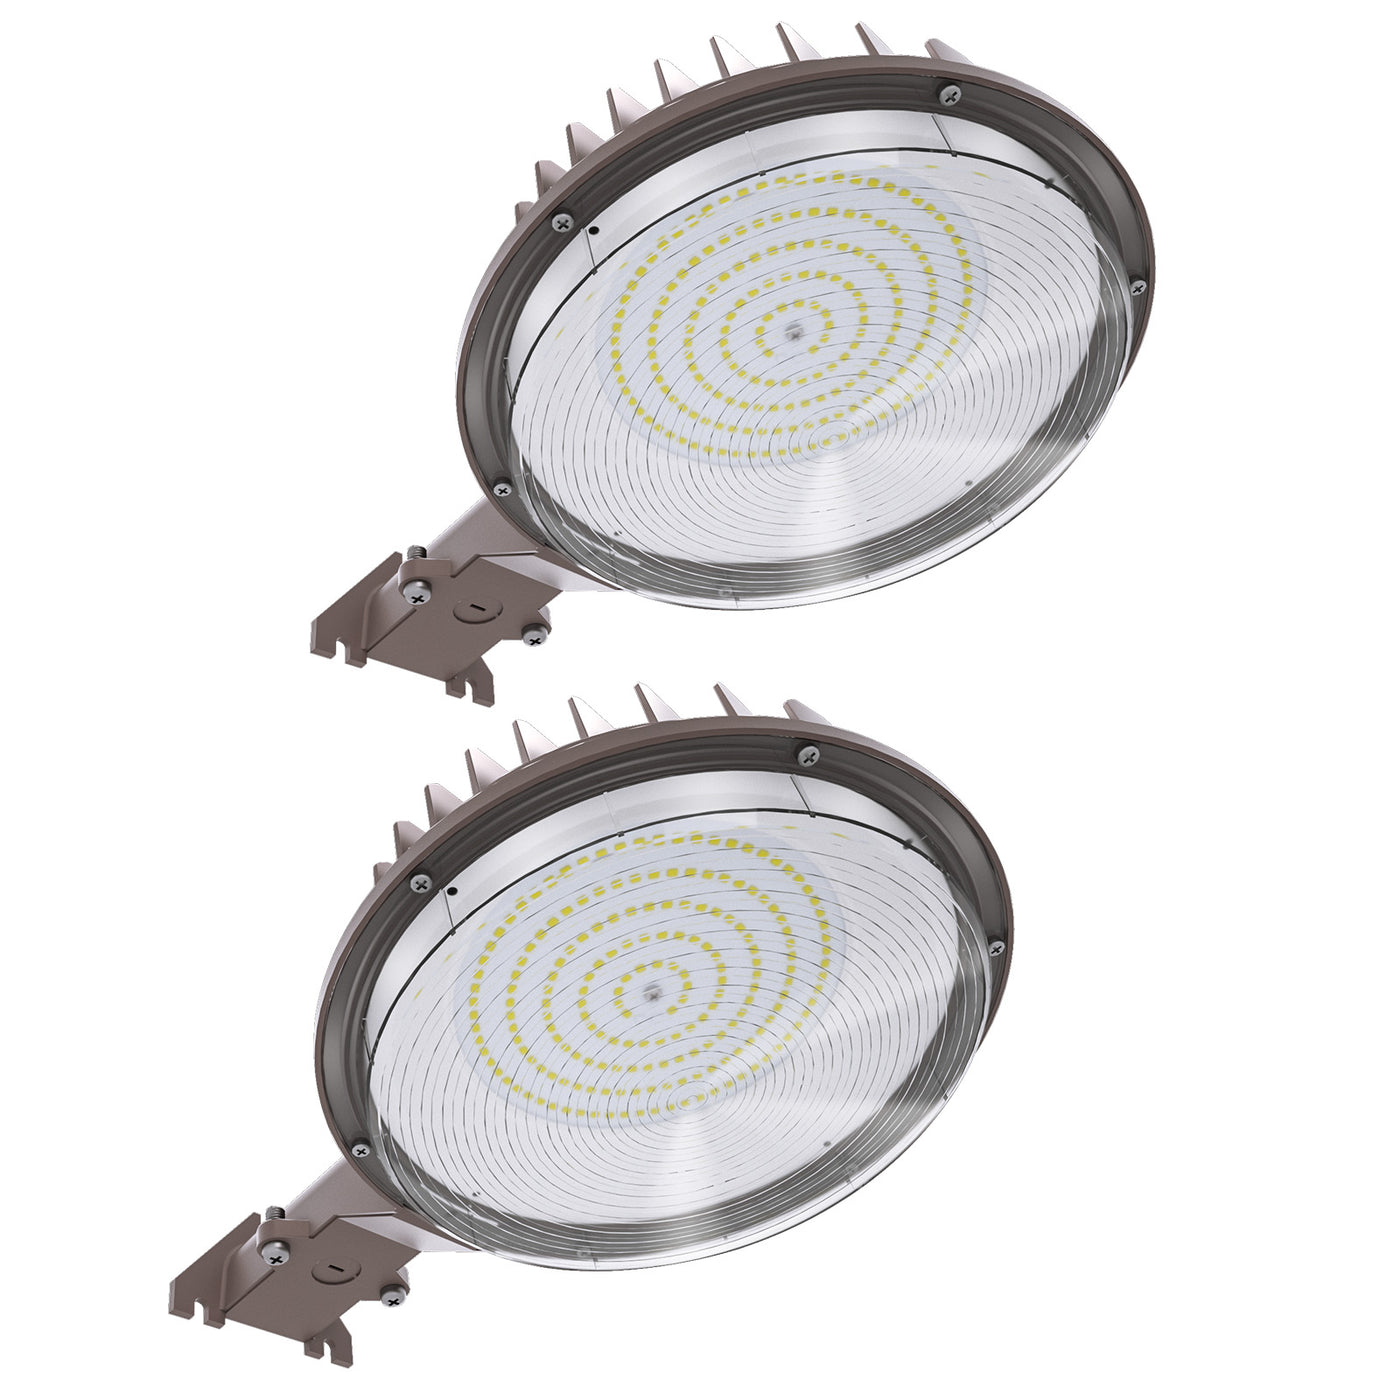 LED Barn Light Outdoor,170LM/W Dusk to Dawn Outdoor Light with Photocell, 5000K Daylight IP67 Waterproof